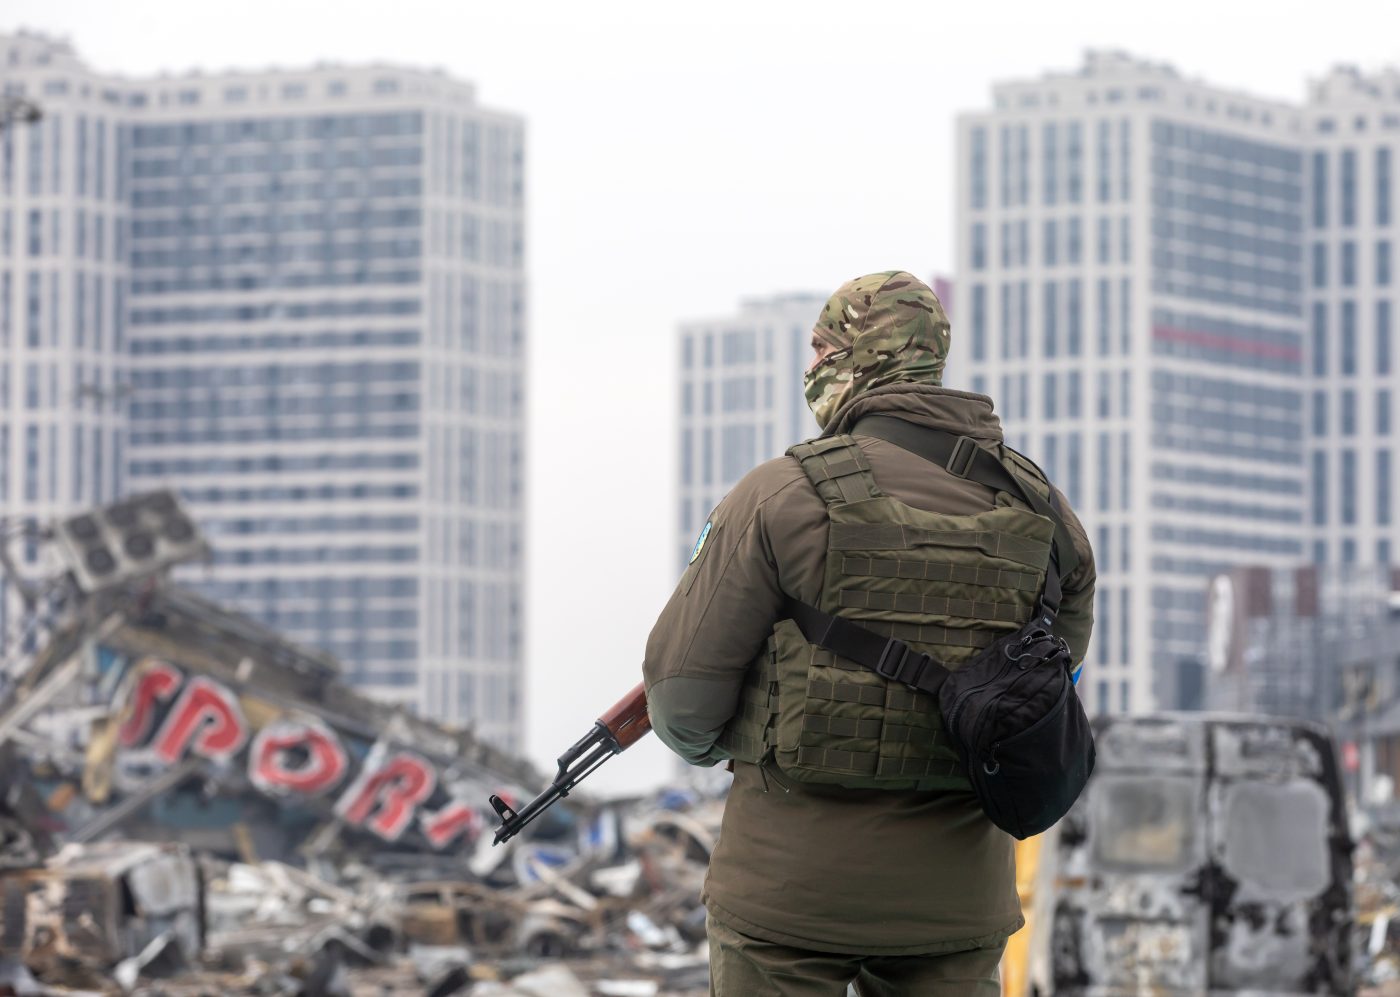 Photo: A soldier with a machine gun is on duty near the destroyed Retroville shopping center. Retroville shopping center including its surrounding areas in Kyiv are destroyed after the Russian shelling attack. According to the emergency service, at least six people died during the attack. Russia invaded Ukraine on 24 February 2022, triggering the largest military attack in Europe since World War II. Credit: Mykhaylo Palinchak / SOPA Images/Sipa USA.